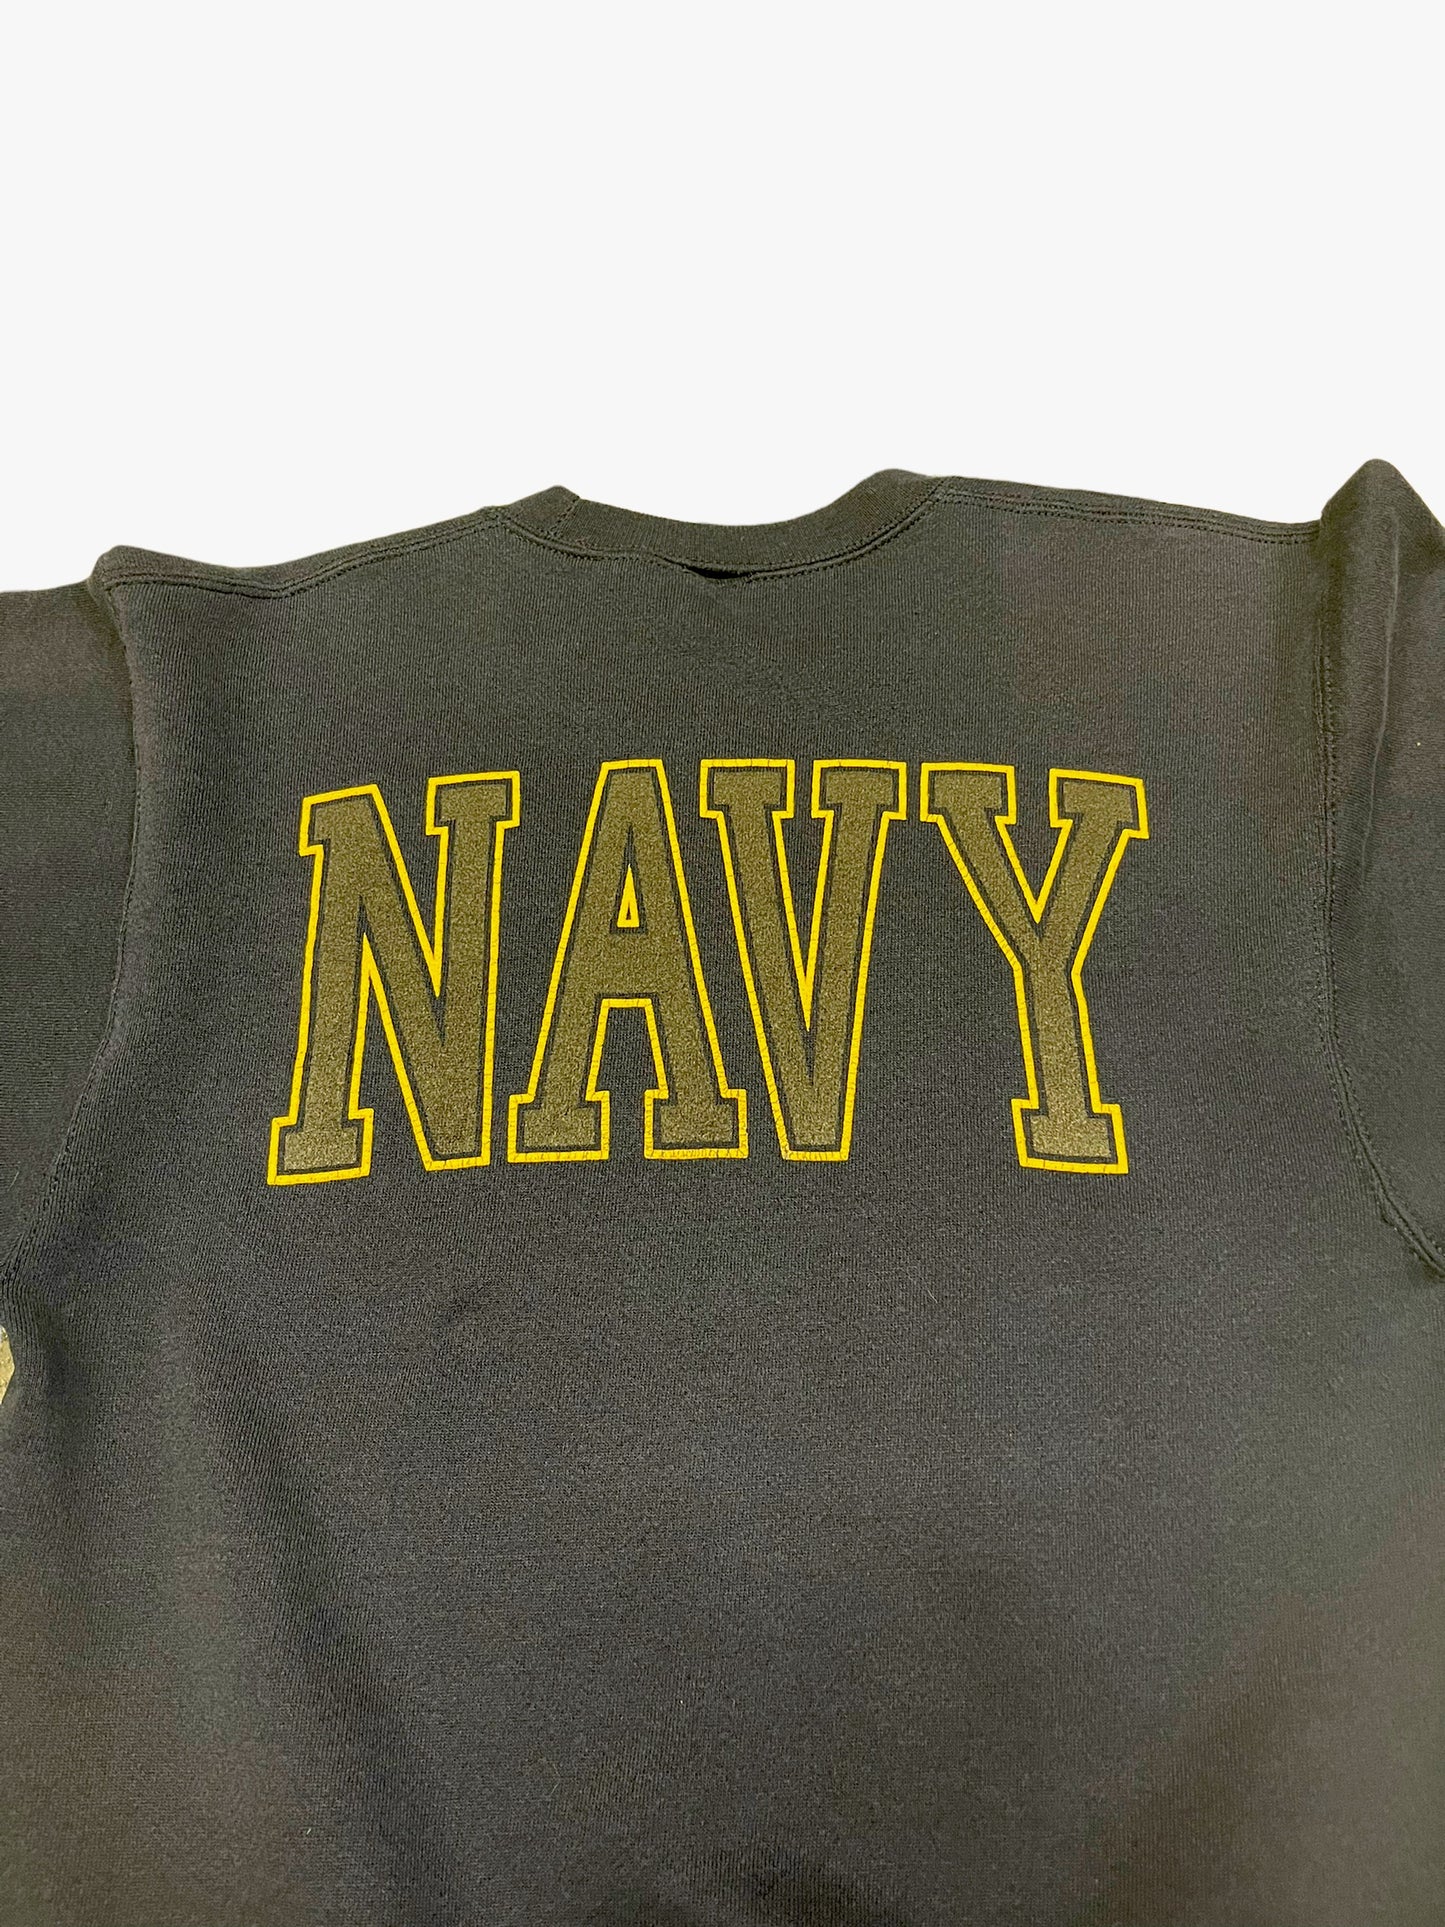 (S) Vintage Navy Double Sided Crewneck